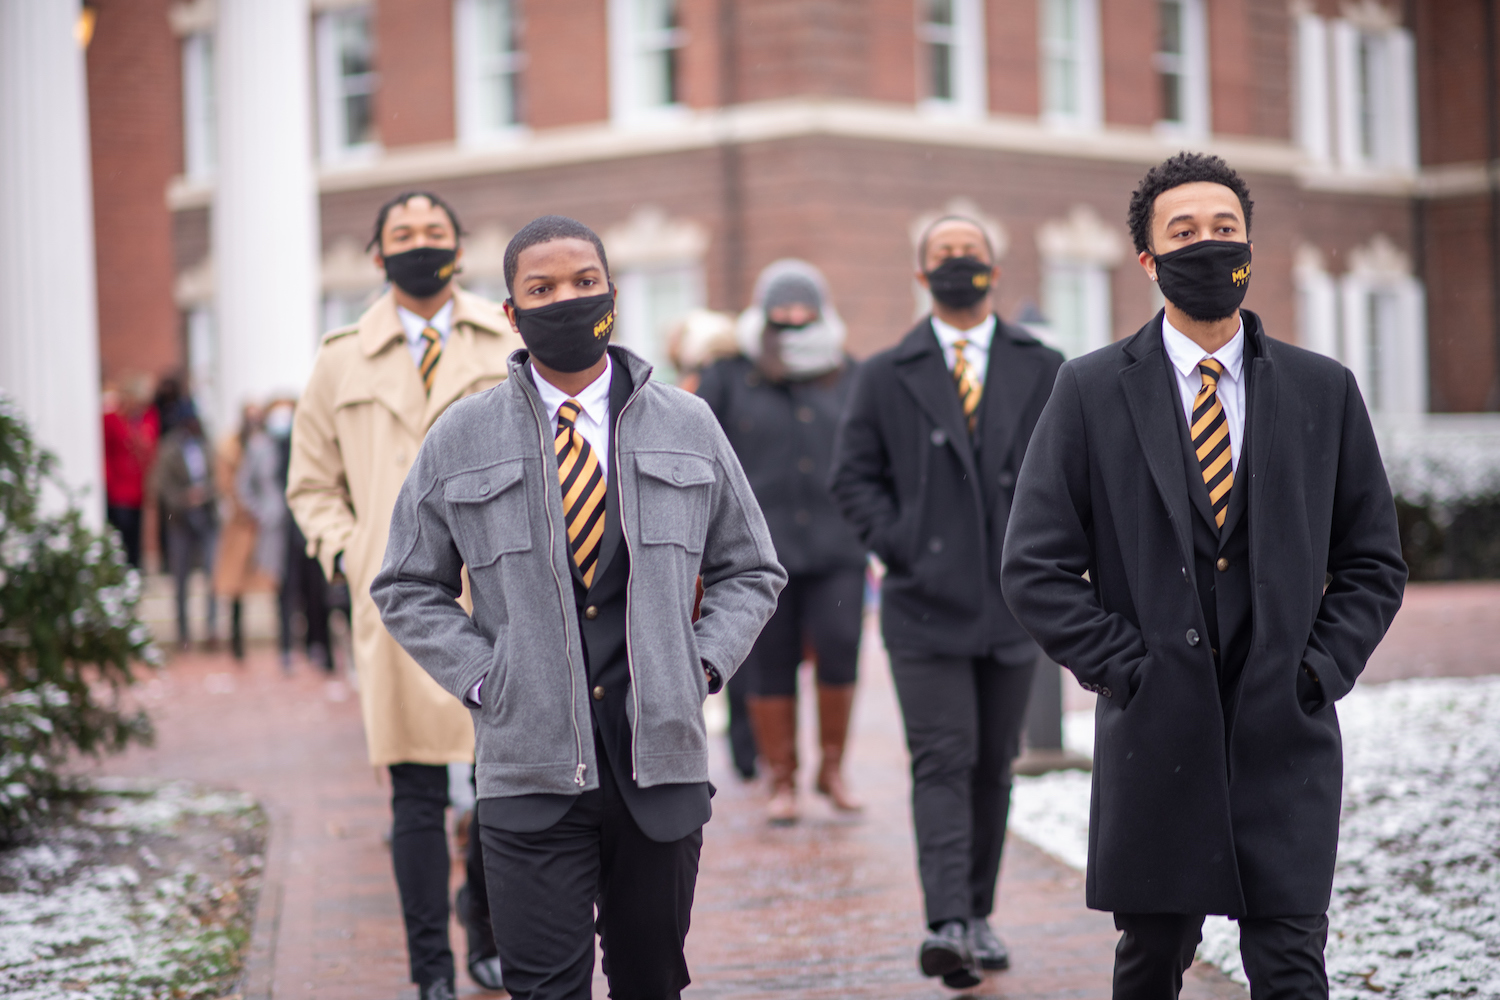 Members of the Alpha Phi Alpha fraternity lead participants through the Ohio University College Green on the Silent March. 